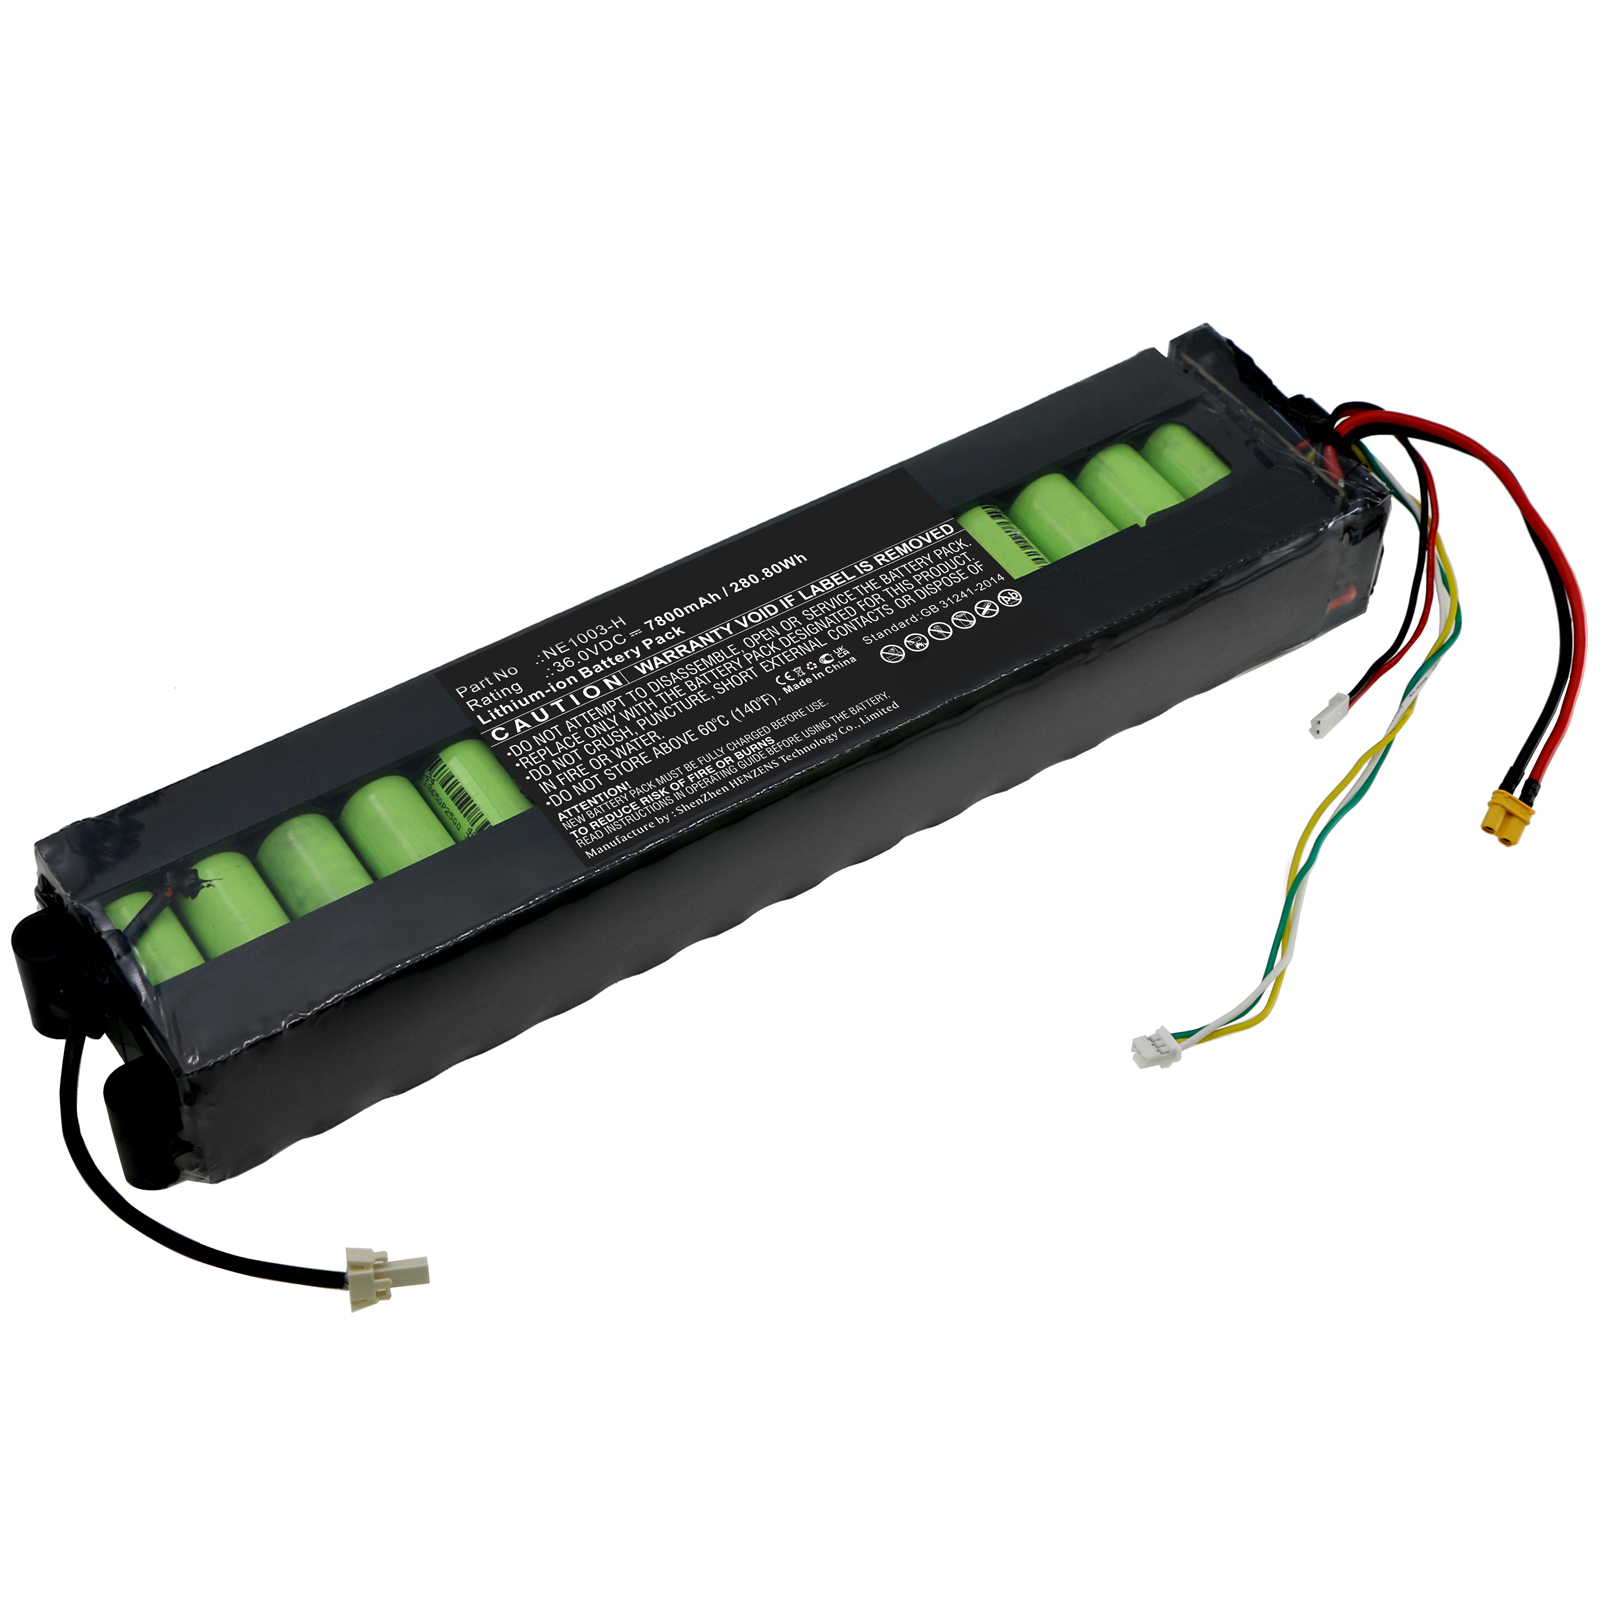 Synergy Digital Scooter Battery, Compatible with Xiaomi NE1003-H Scooter Battery (Li-ion, 36V, 7800mAh)